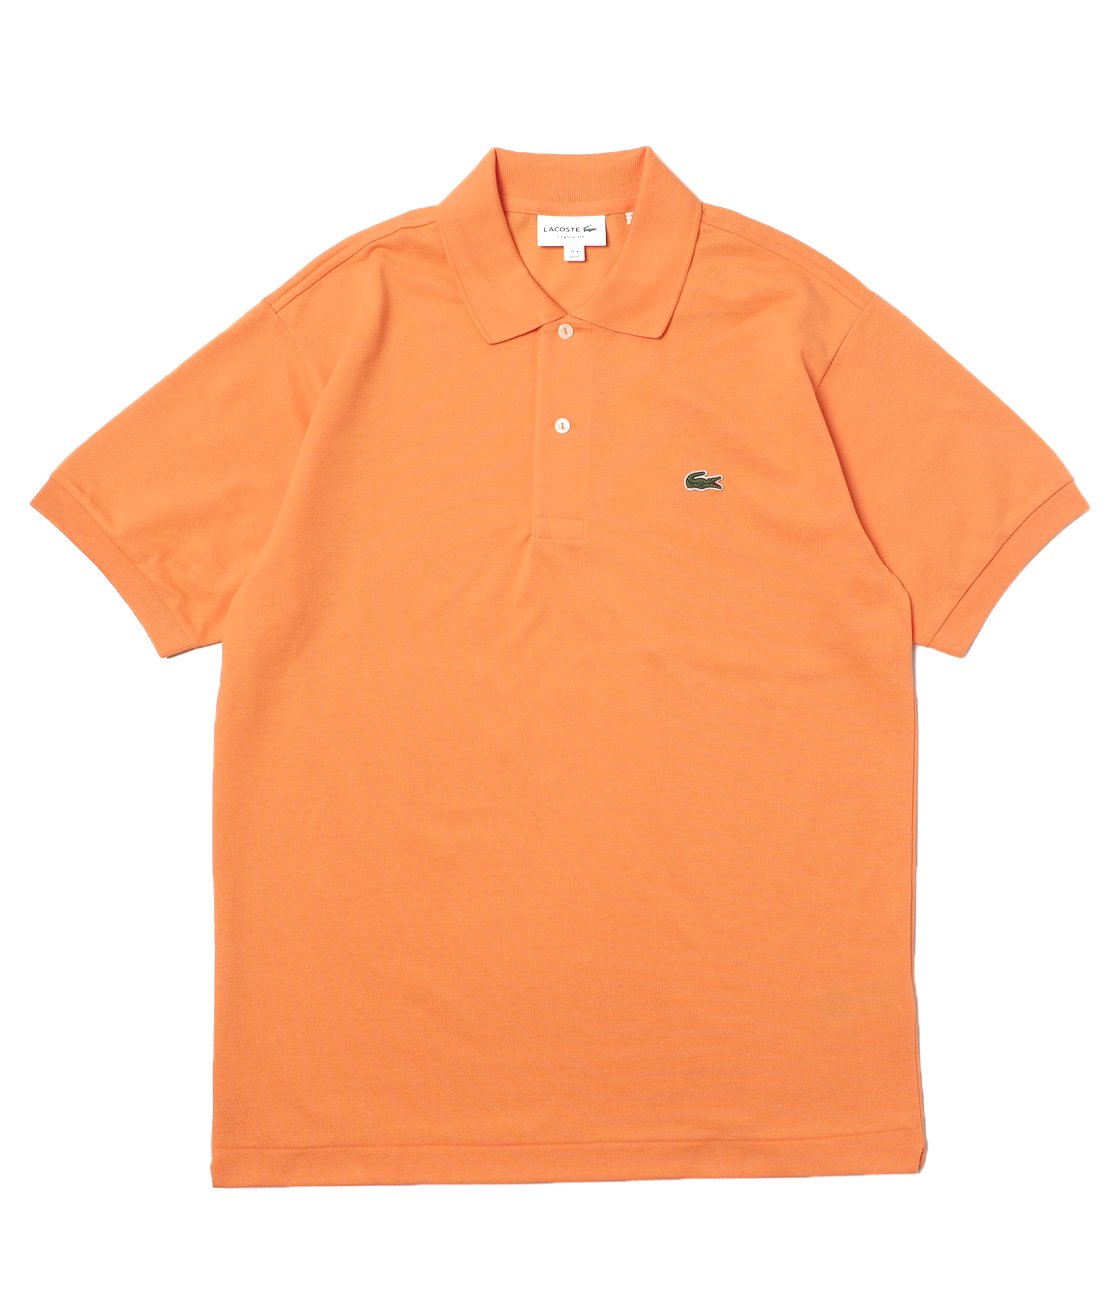 LACOSTE】L1212 S/S CLASSIC PIQUET POLO ポロシャツ ラコステ 並行輸入品 DORY